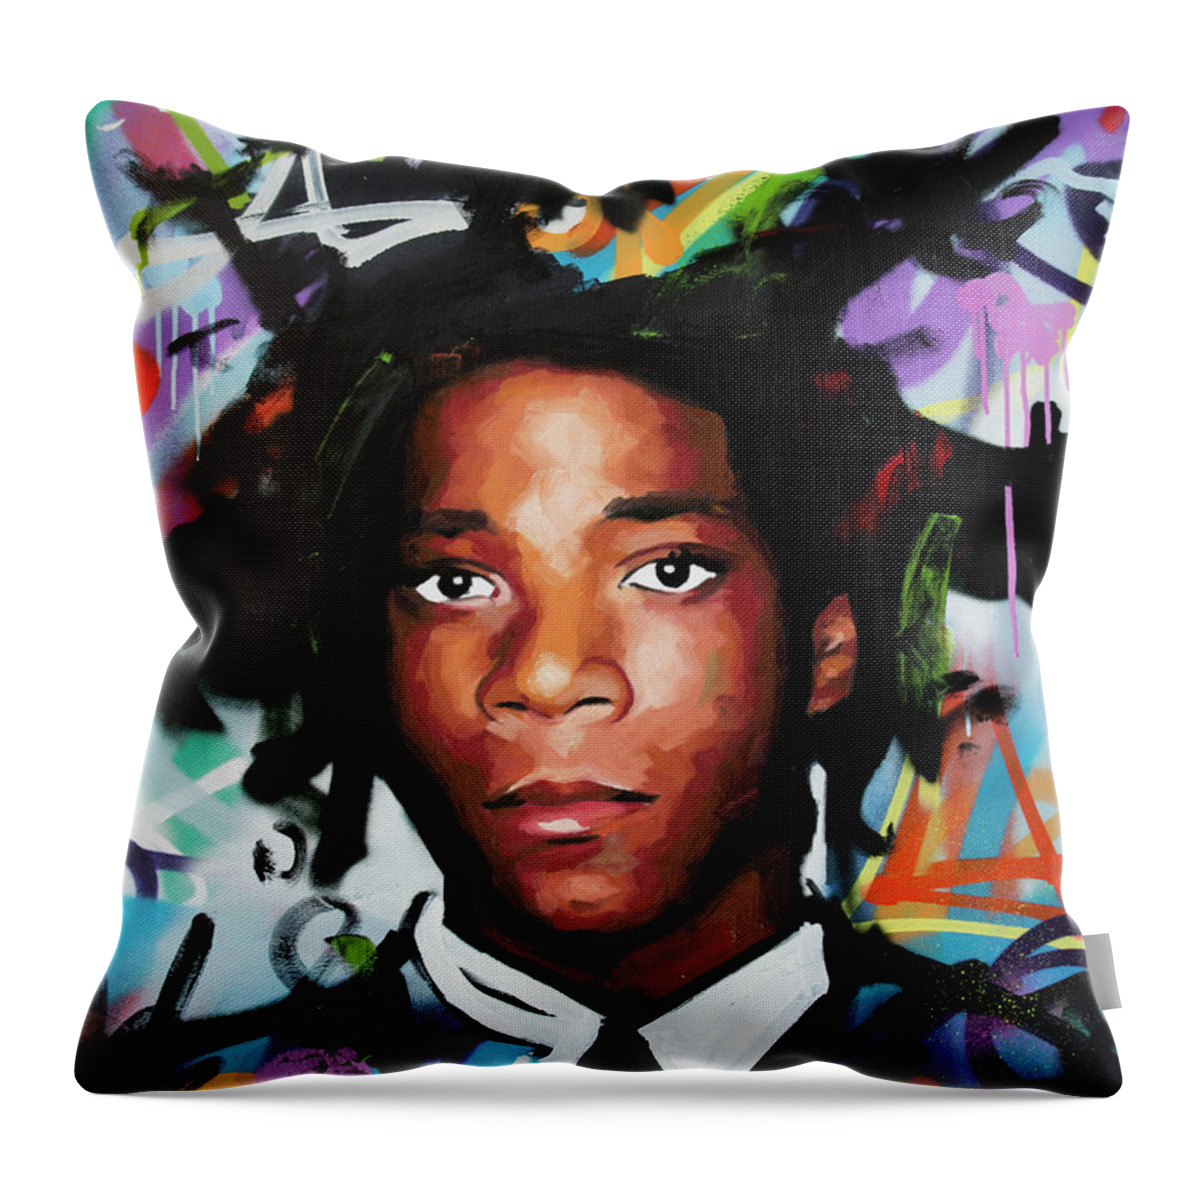 Jean Throw Pillow featuring the painting Jean Michel Basquiat II by Richard Day